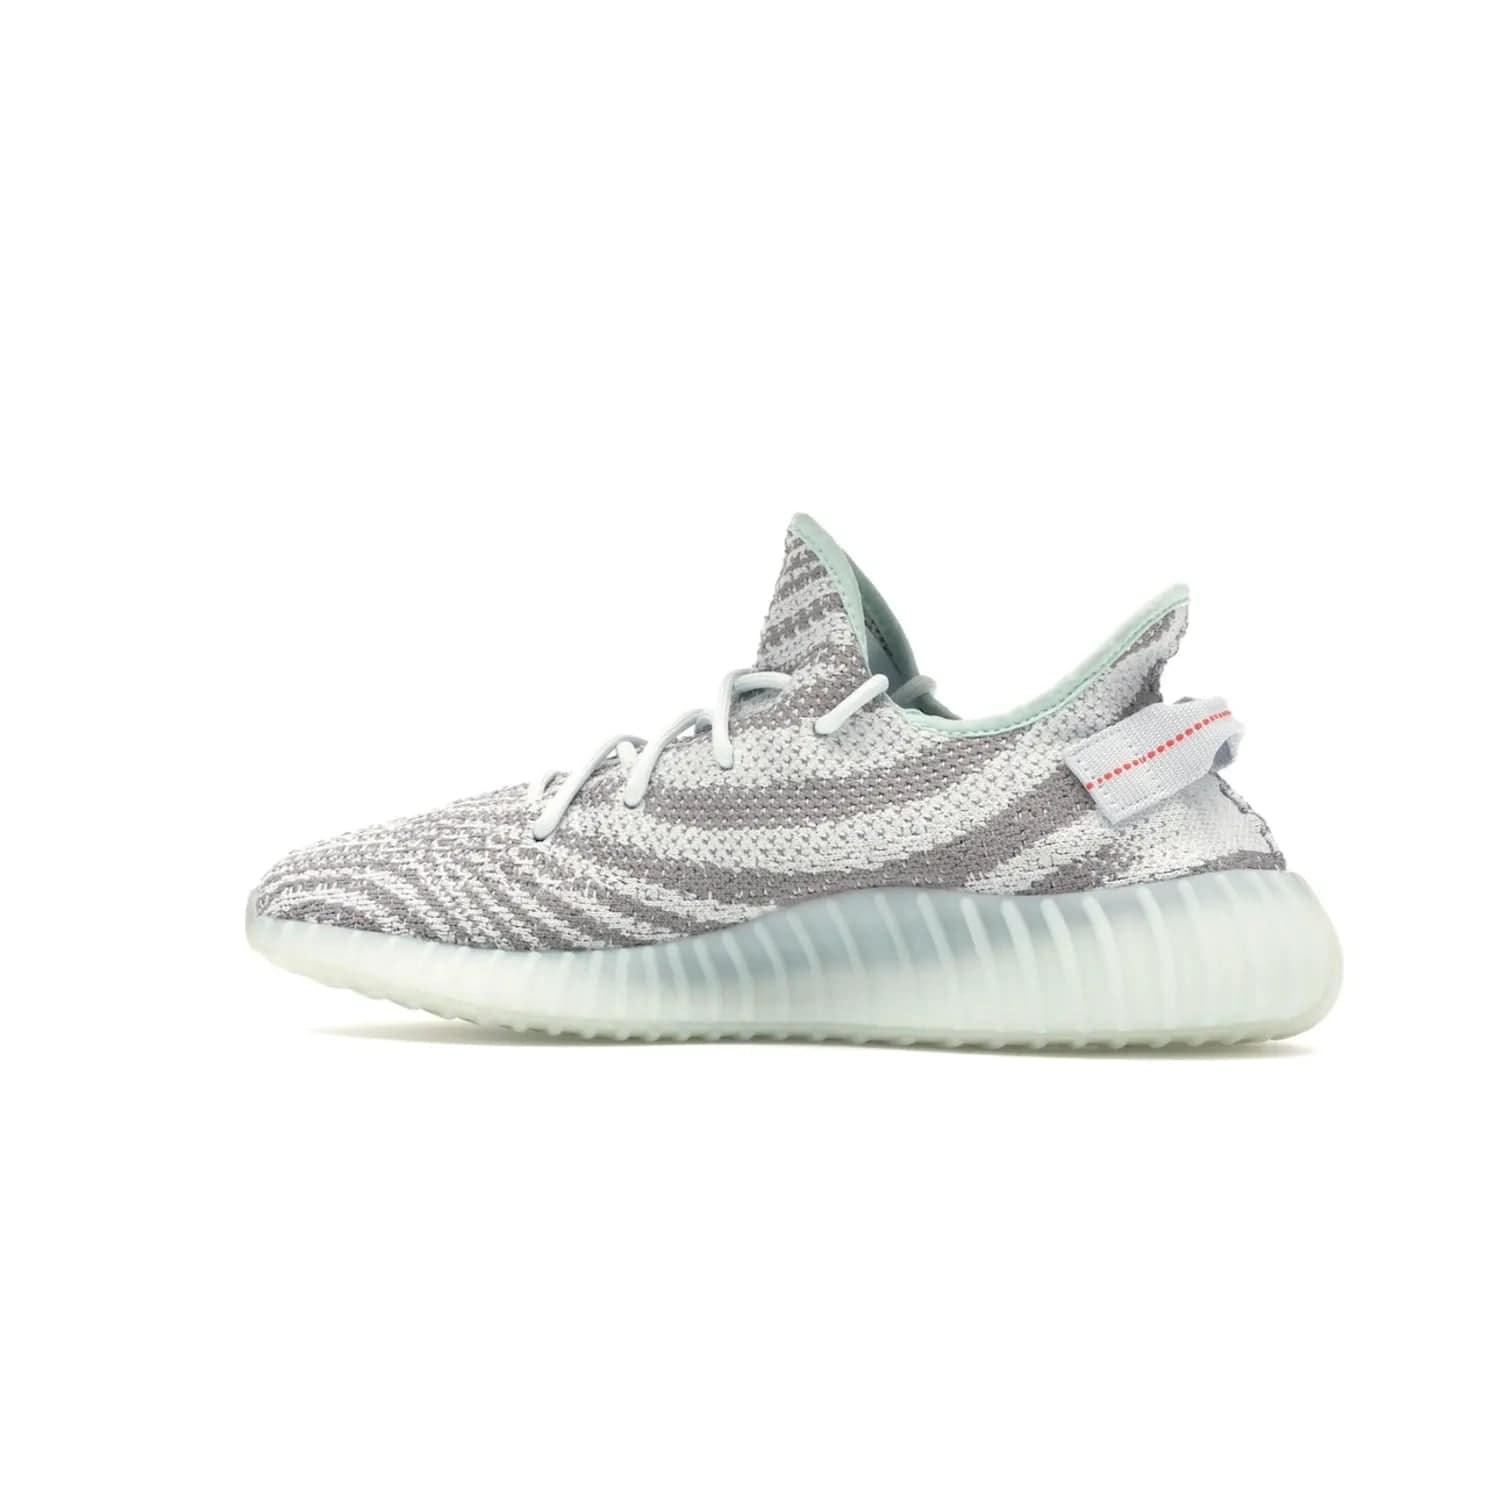 adidas Yeezy Boost 350 V2 Blue Tint - Image 21 - Only at www.BallersClubKickz.com - The adidas Yeezy Boost 350 V2 Blue Tint merges fashion and functionality with its Primeknit upper and Boost sole. Released in December 2017, this luxurious sneaker is perfect for making a stylish statement.